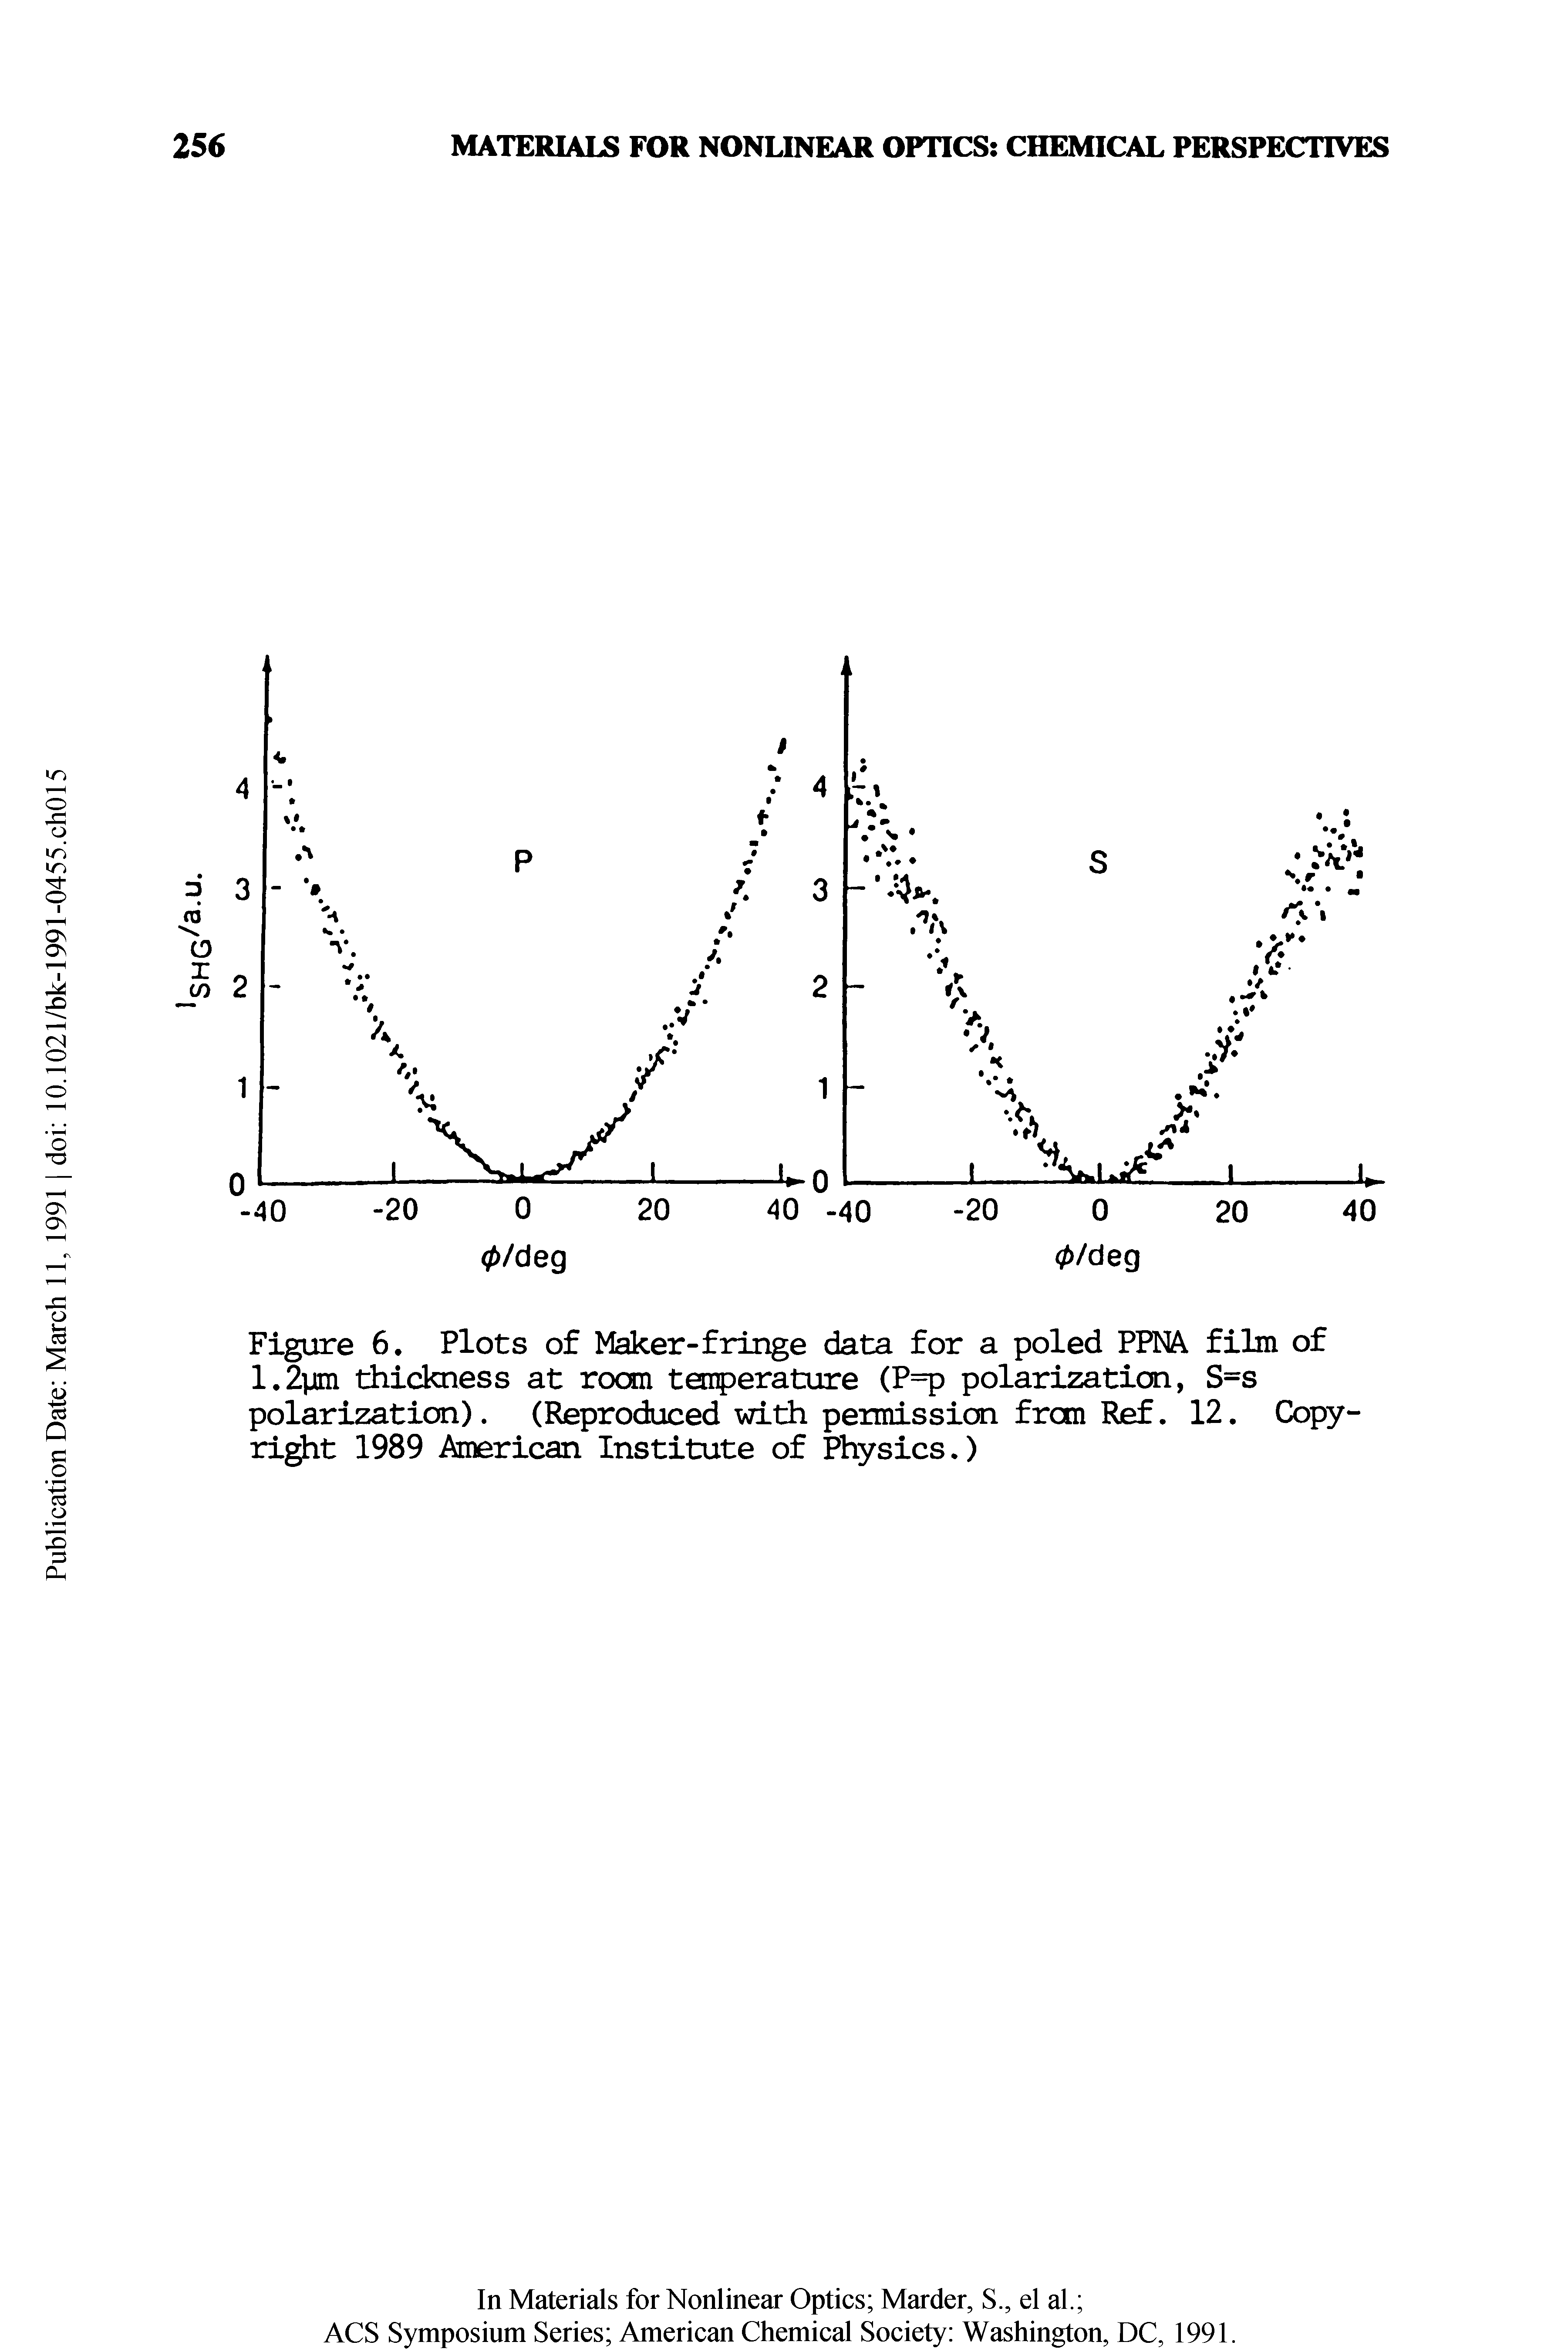 Figure 6. Plots of Maker-fringe data for a poled PPNA film of 1.2pm thickness at room temperature (P=p polarization, S=s polarization). (Reproduced with permission from Ref. 12. Copyright 1989 American Institute of Physics.)...